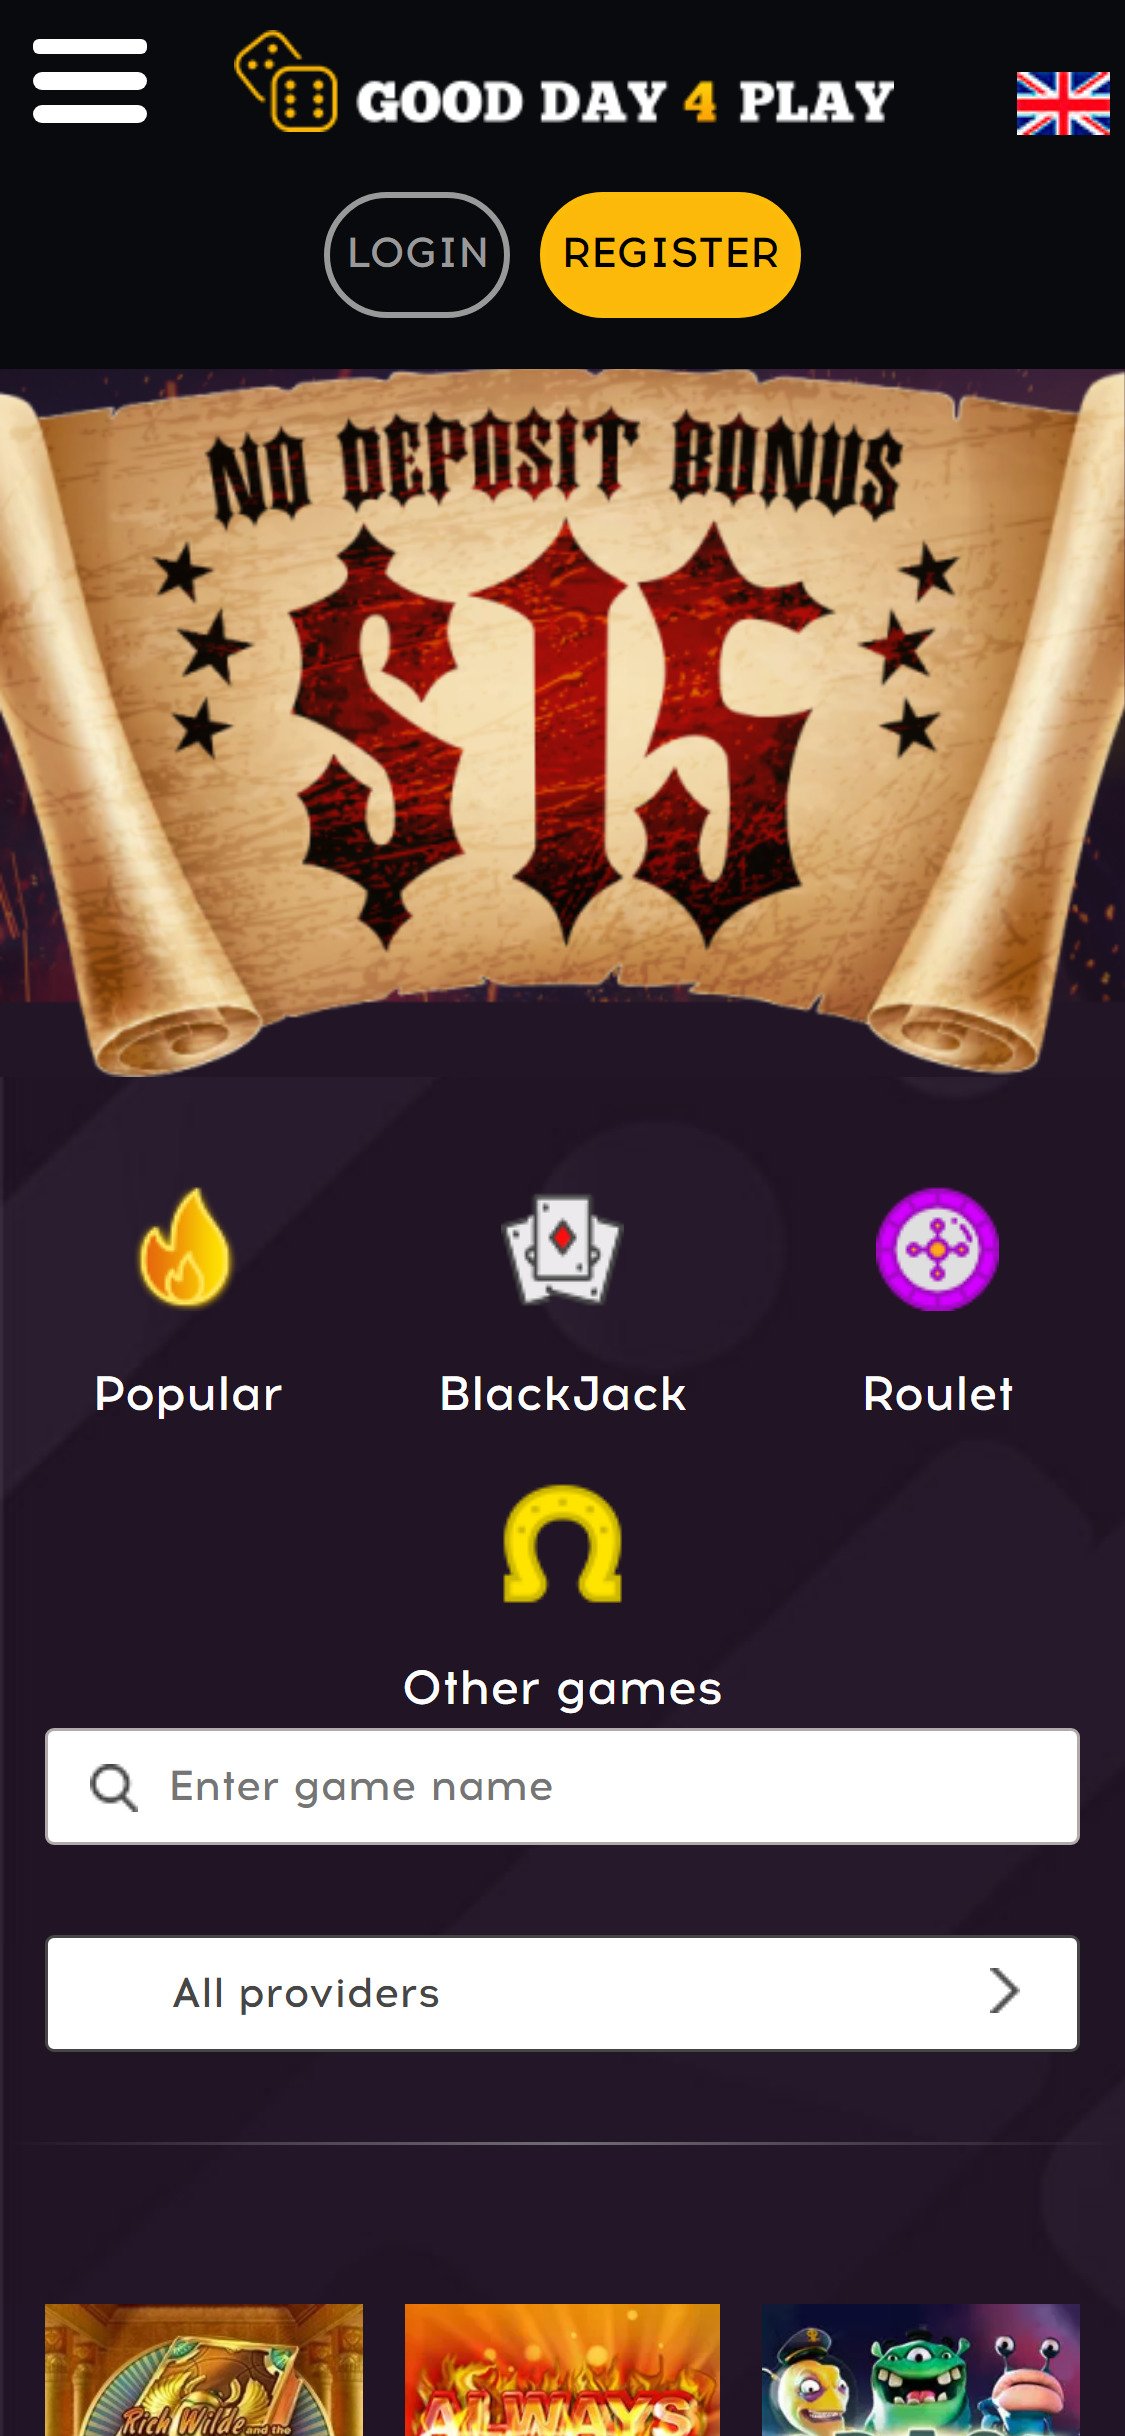 Good Day 4 Play Casino Mobile Review